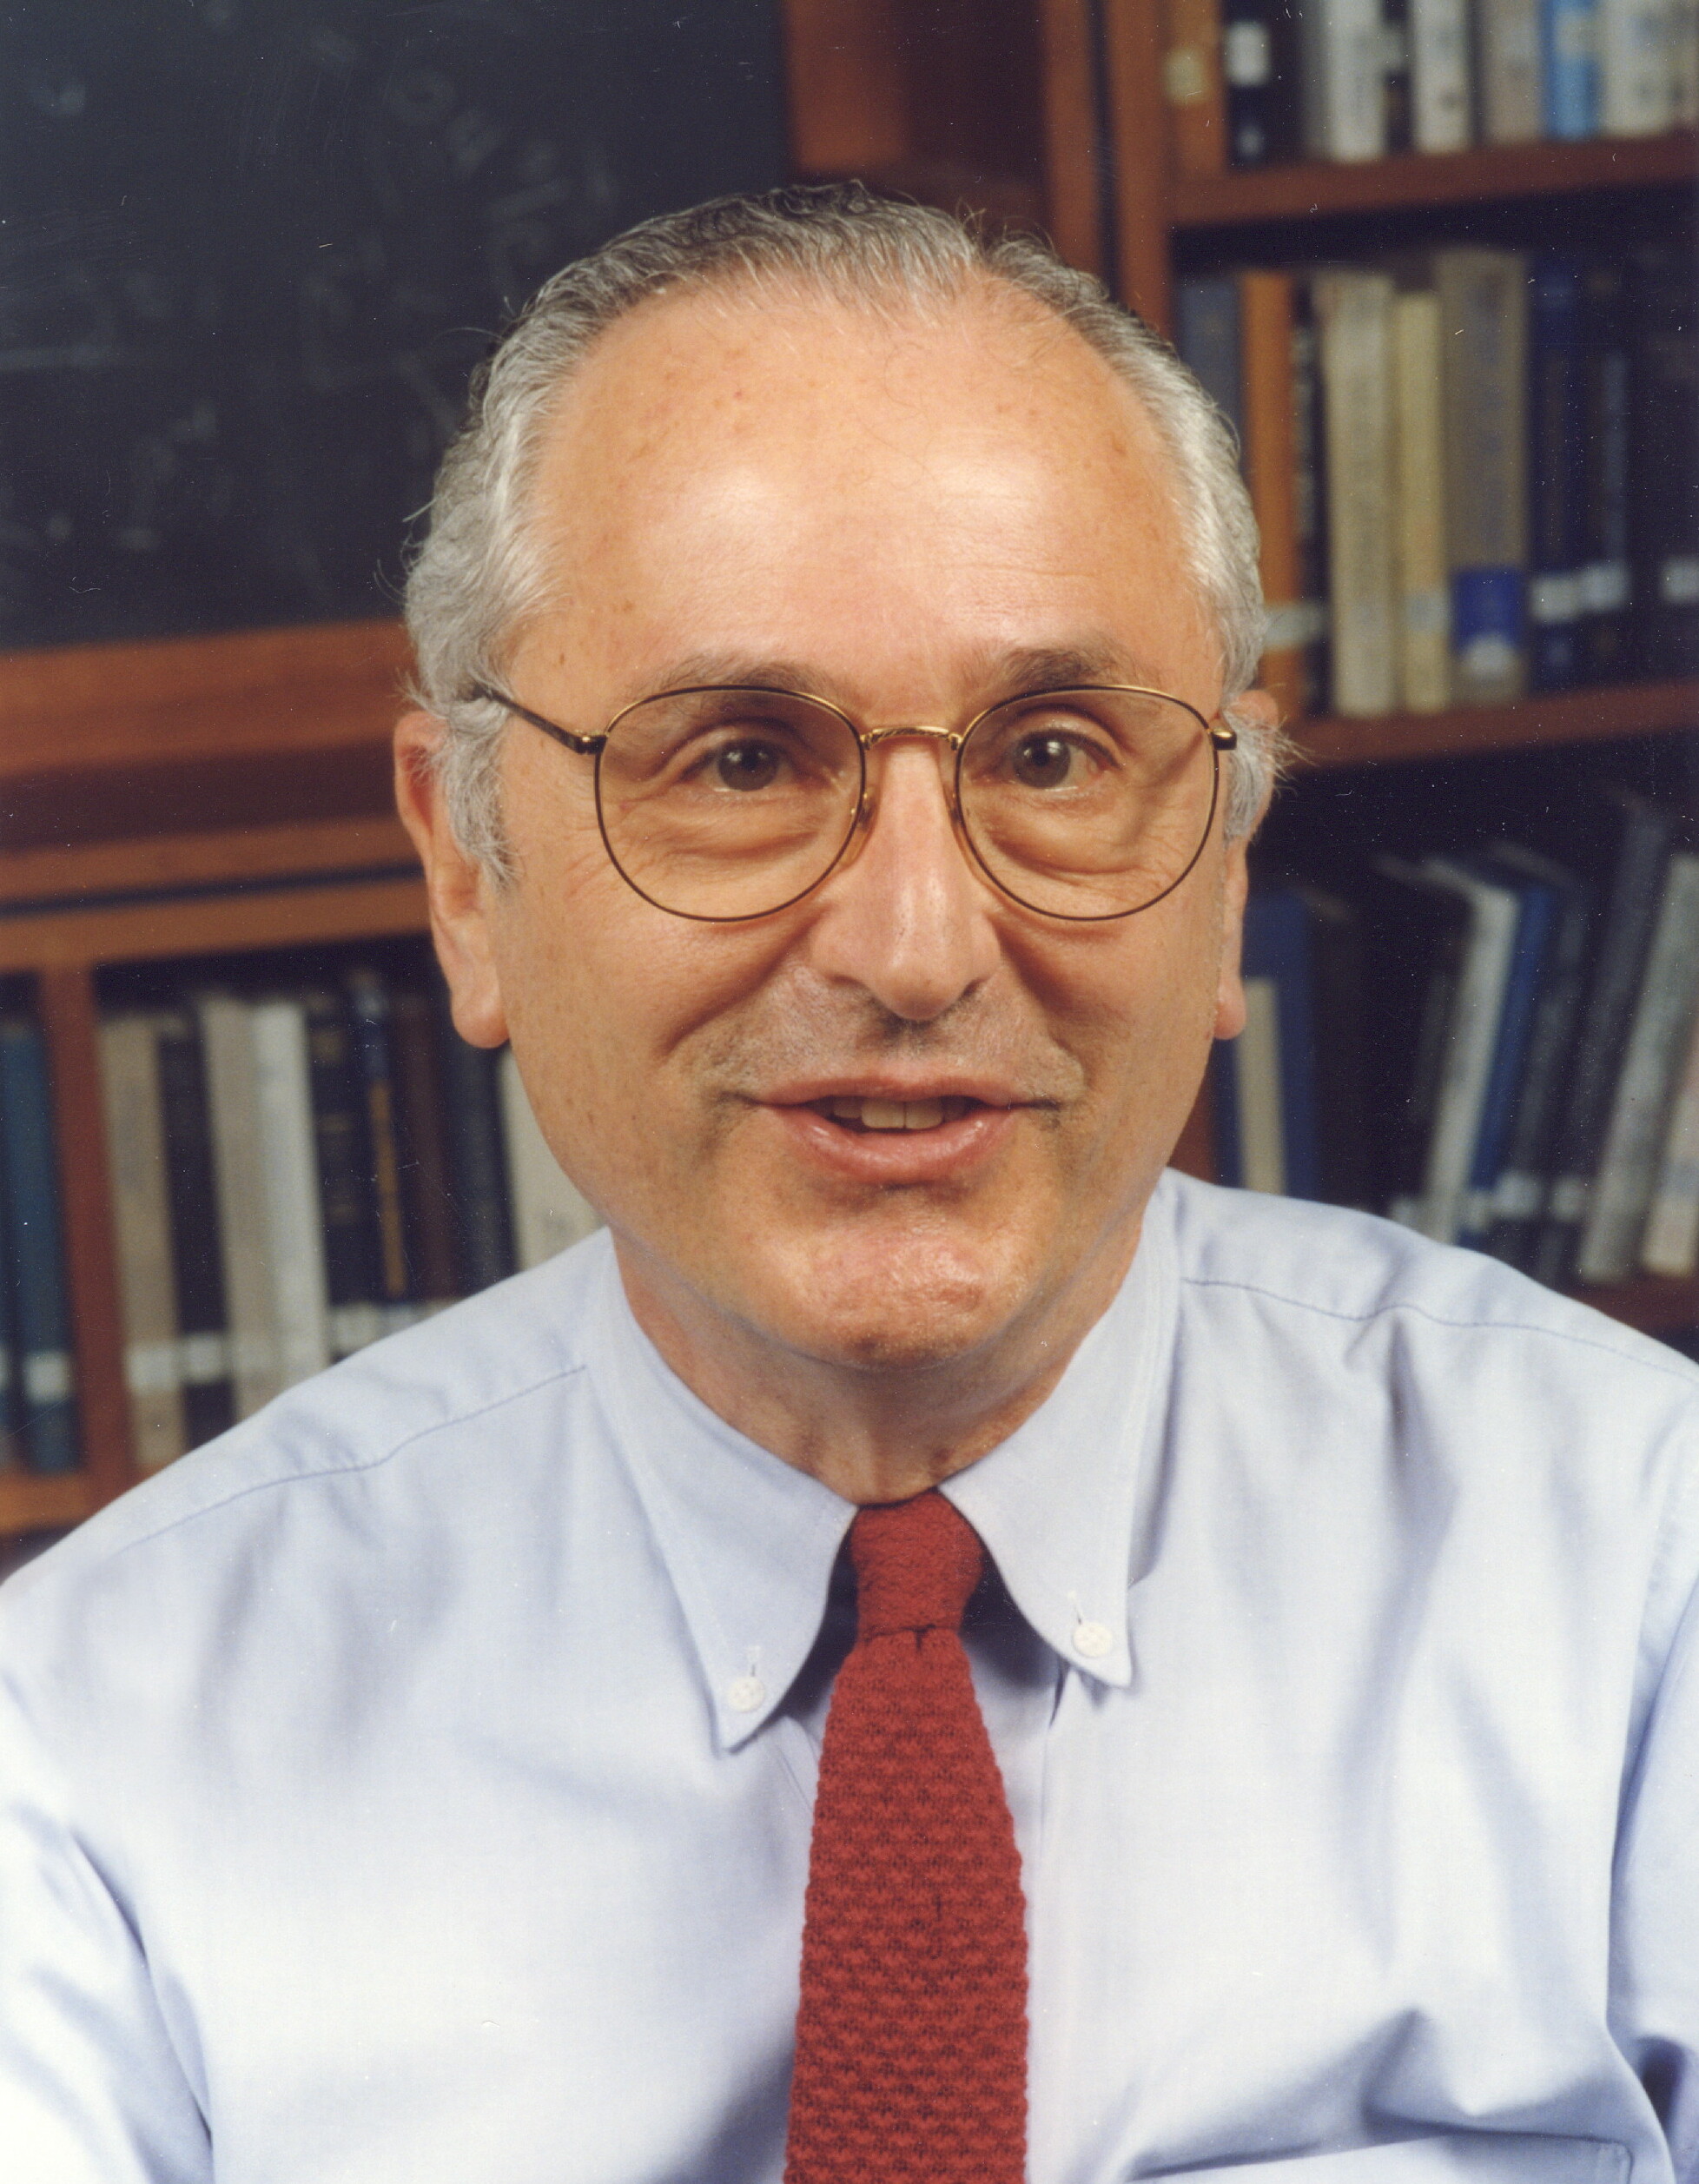 John Bahcall looks at the camera in front of a bookshelf. He wears a light gray shirt, red tie, and glasses.